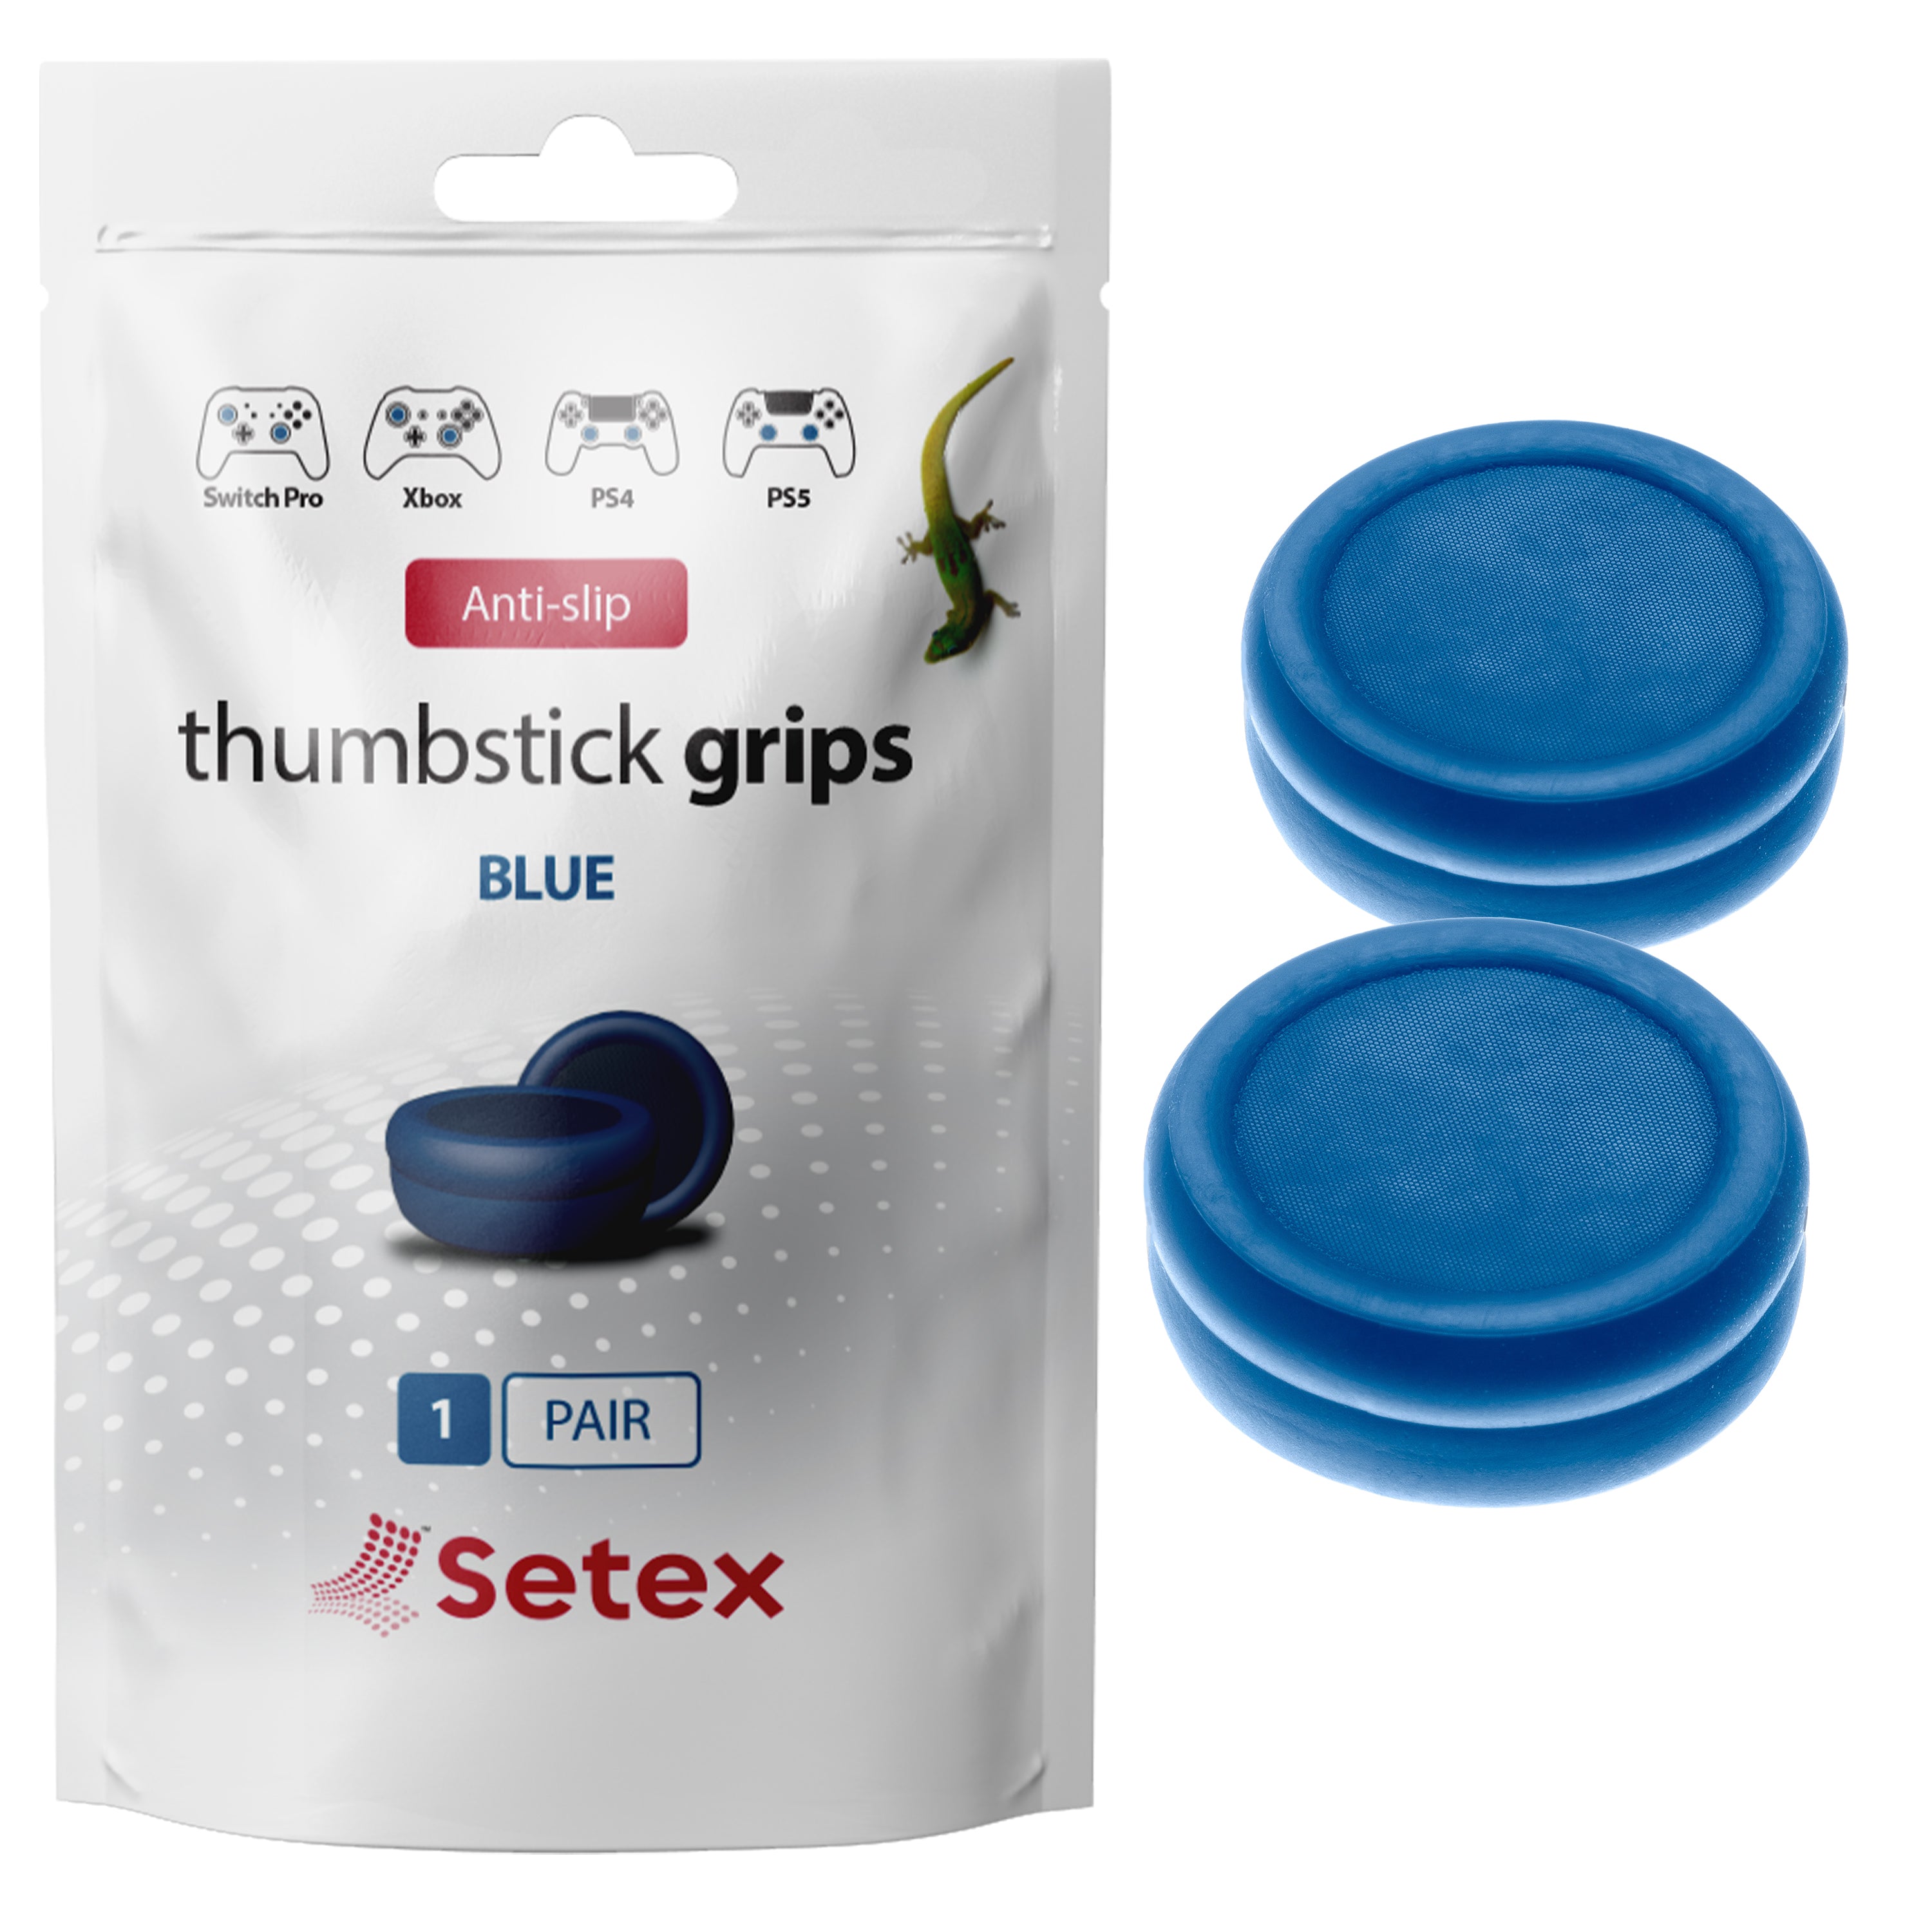 Setex® Thumbstick Grips - For PS4, PS5, Xbox and Switch